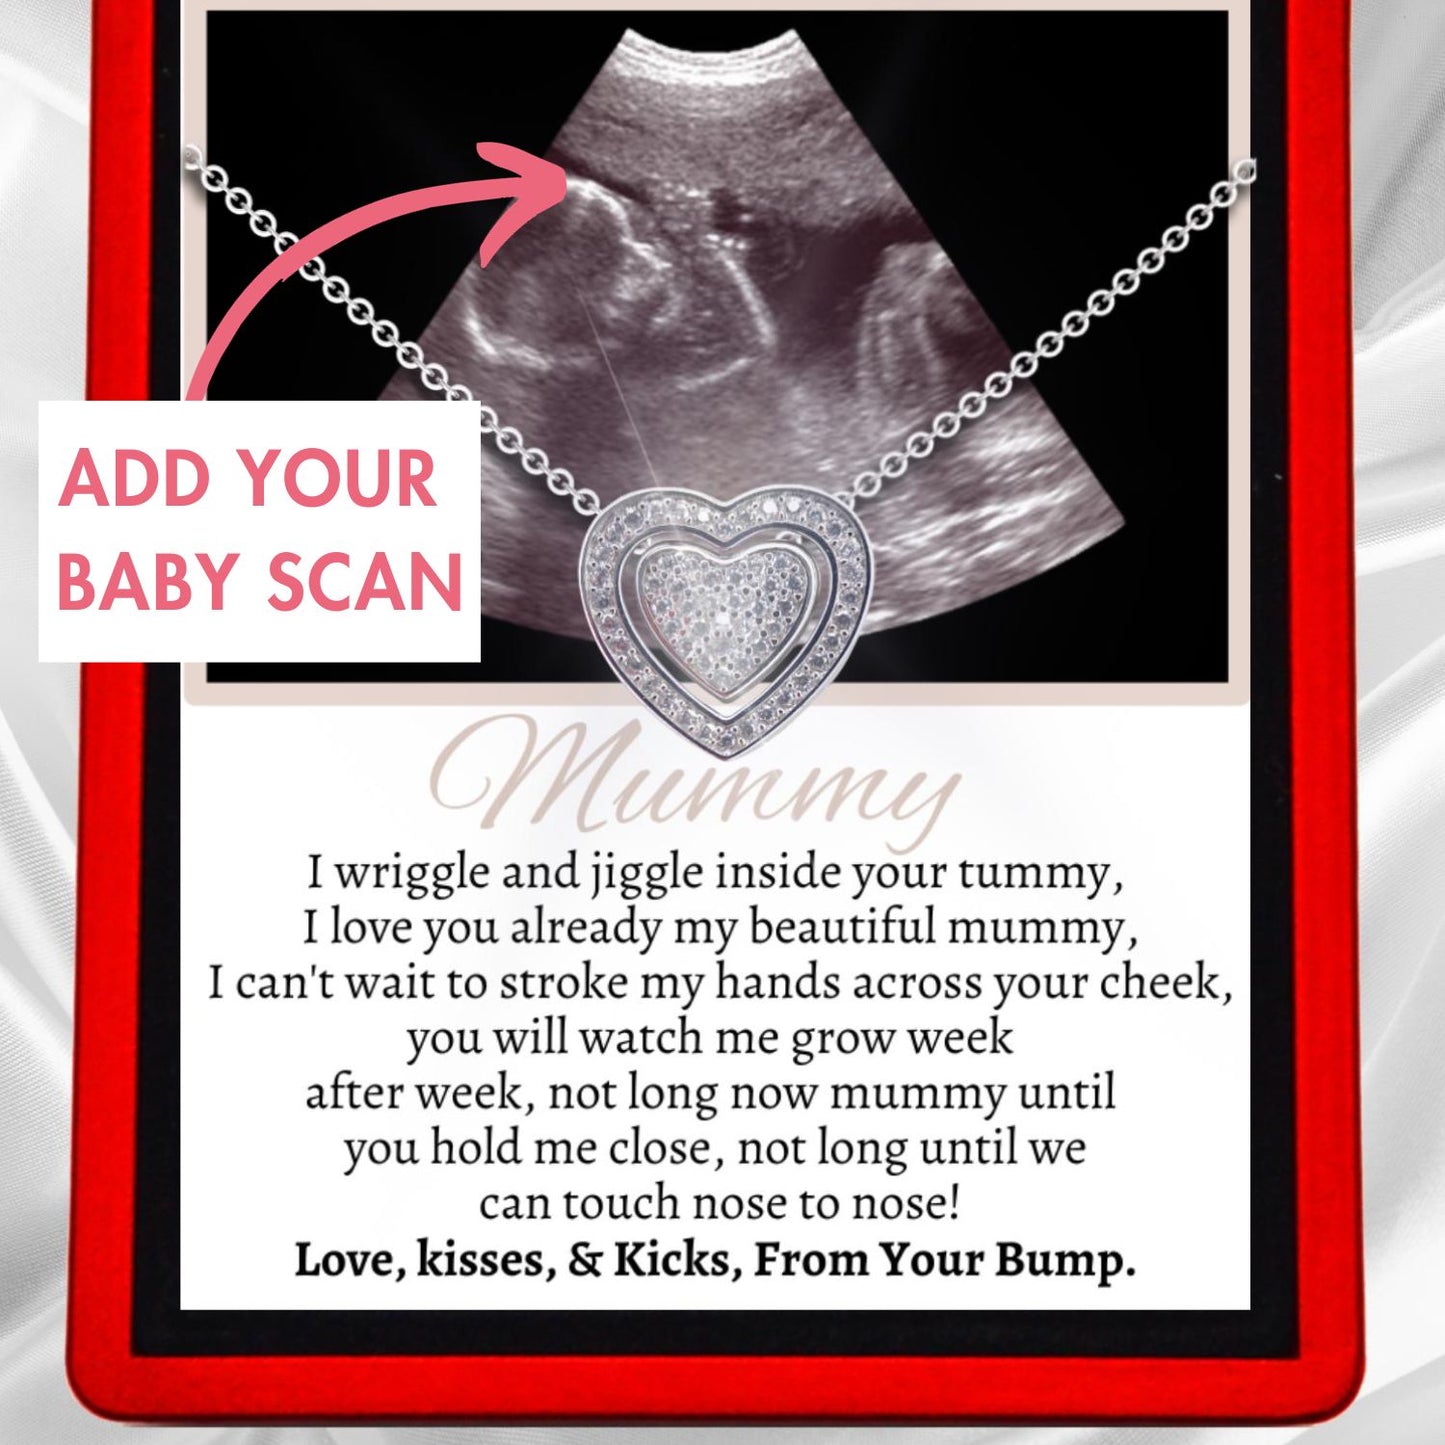 Ultrasound "Mummy To be" Love Heart Trinity Necklace 3 in 1 - MummyScan